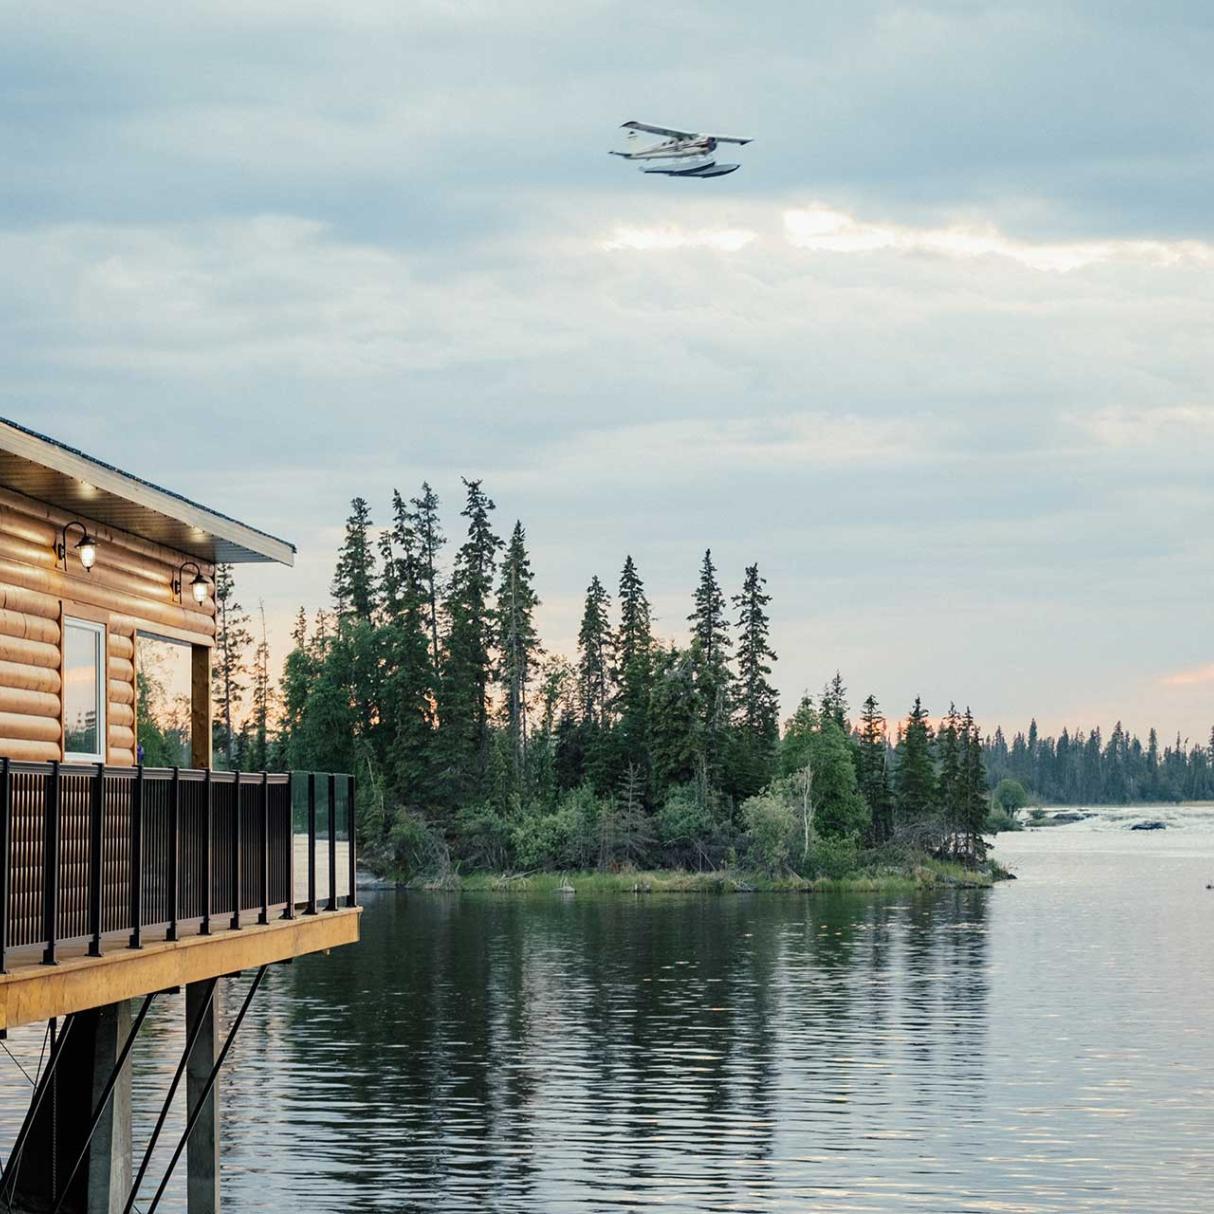 A float plane flys over a forest where a log cabin overlooks a lake